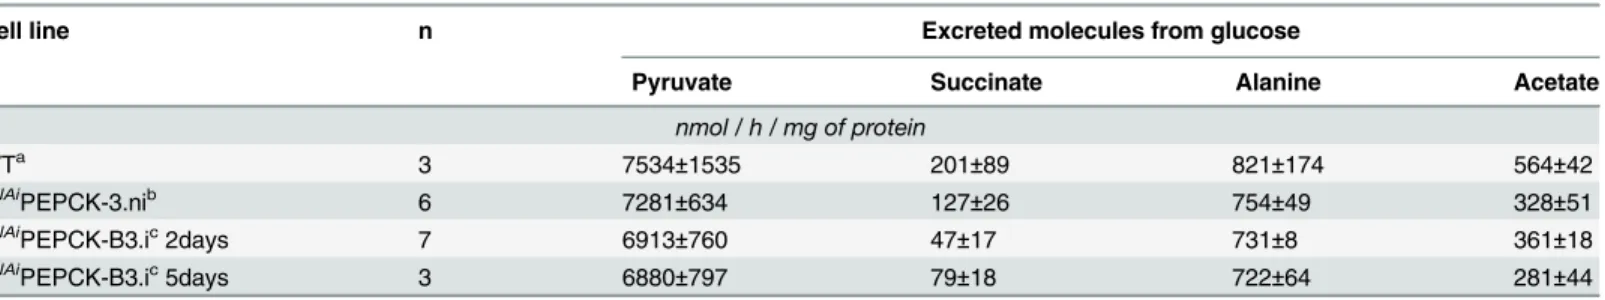 Table 1. Production of succinate, pyruvate, alanine and acetate from glucose in PEPCK RNAi T 